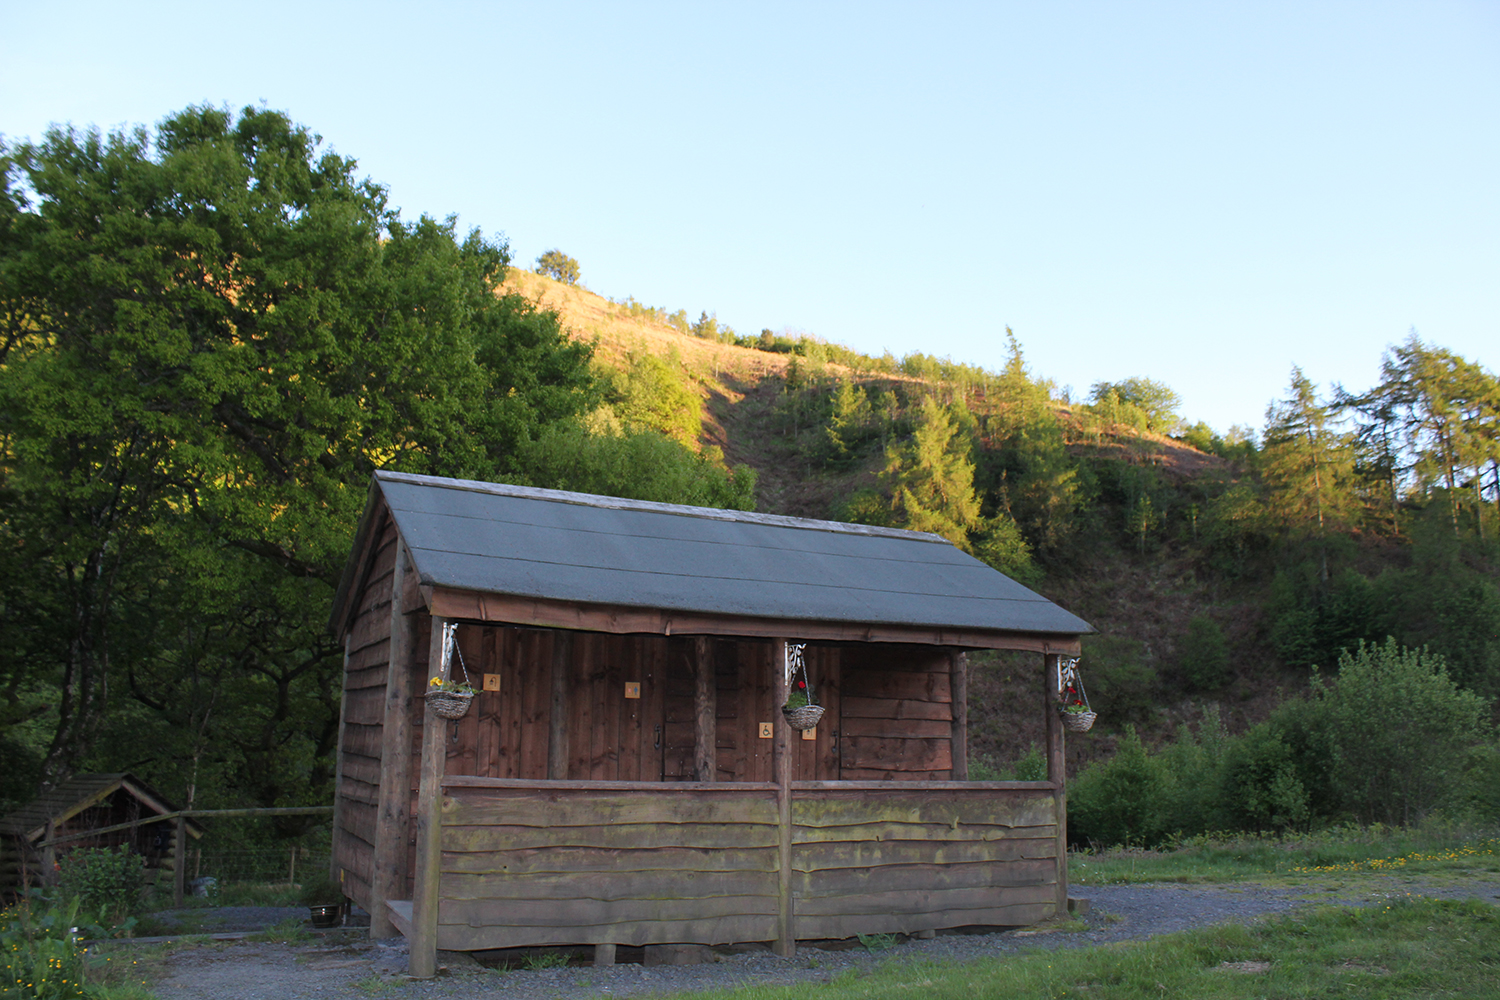 Toilet and shower block at Cledan Valley